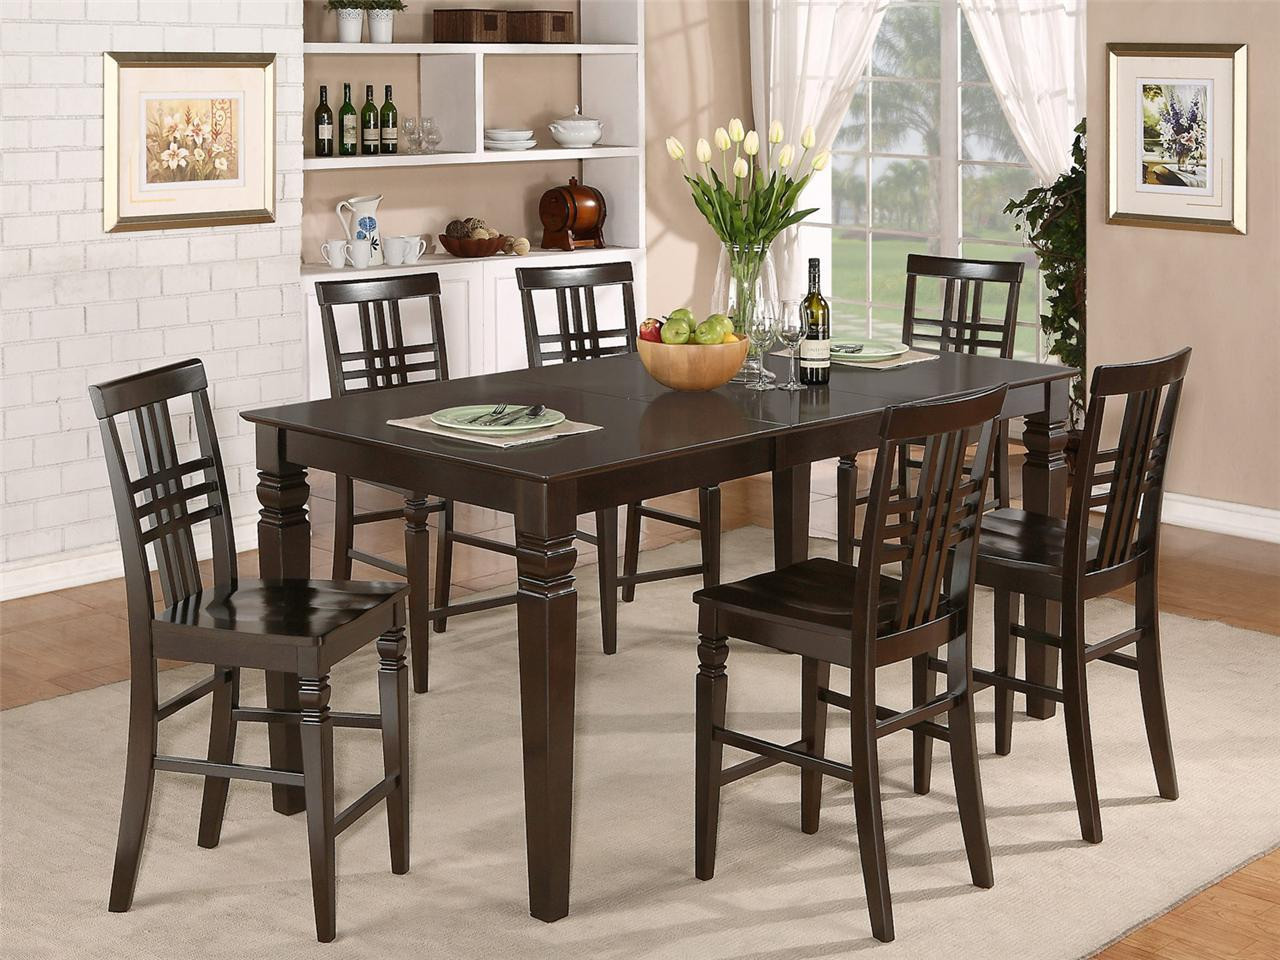 Counter Height Kitchen Sets
 7PC RECTANGULAR COUNTER HEIGHT DINING ROOM TABLE SET & 6